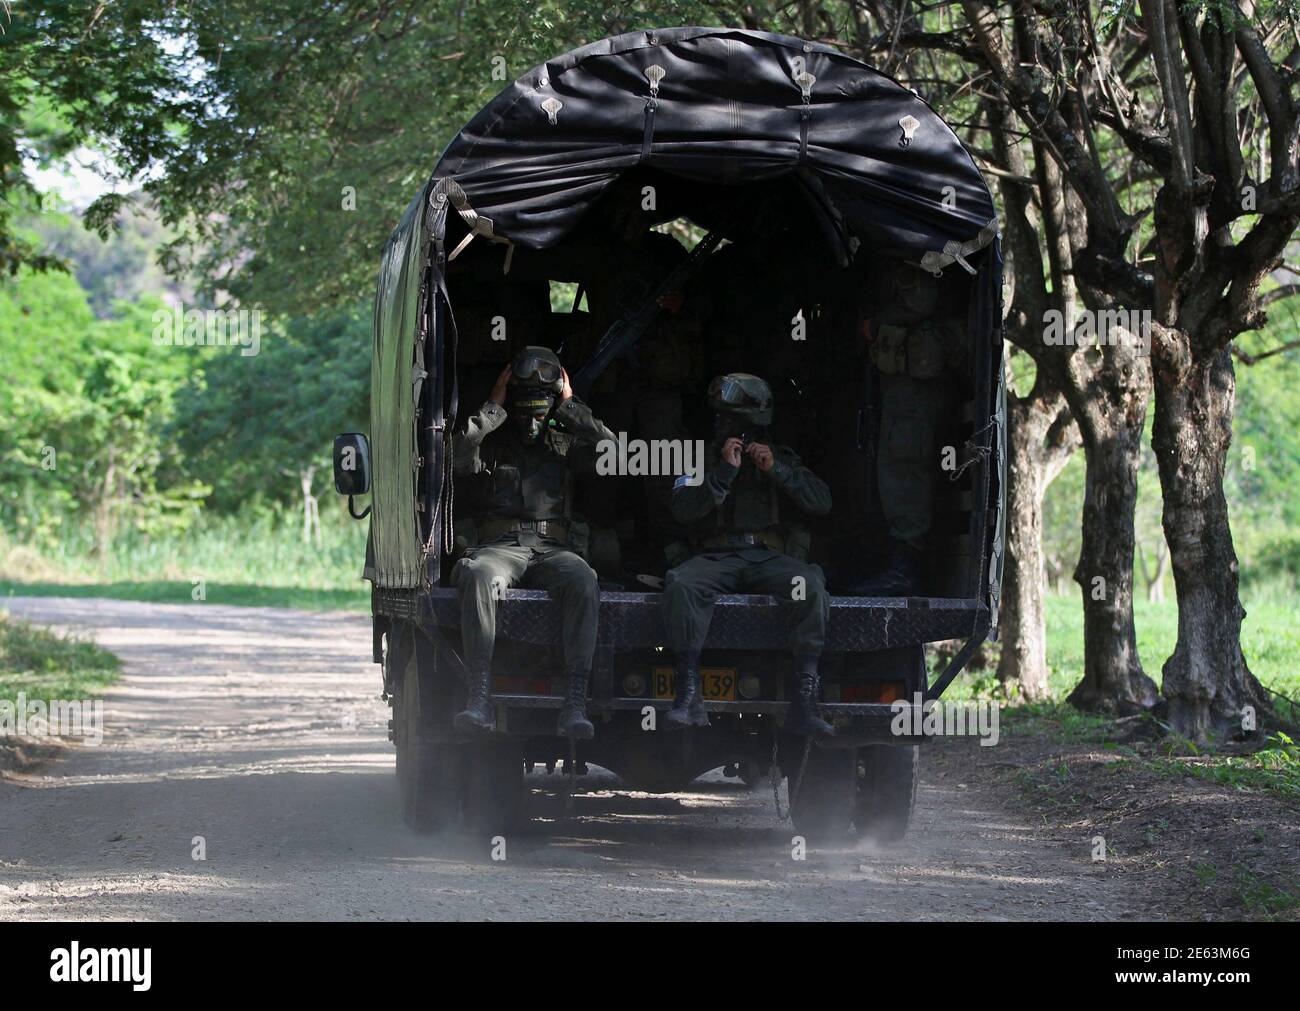 Policemen are transported by a truck before a training at the Jungla  International Course, in Chicoral near Ibague November 26, 2013. Every year  the Colombian police force invites elite law enforcement and